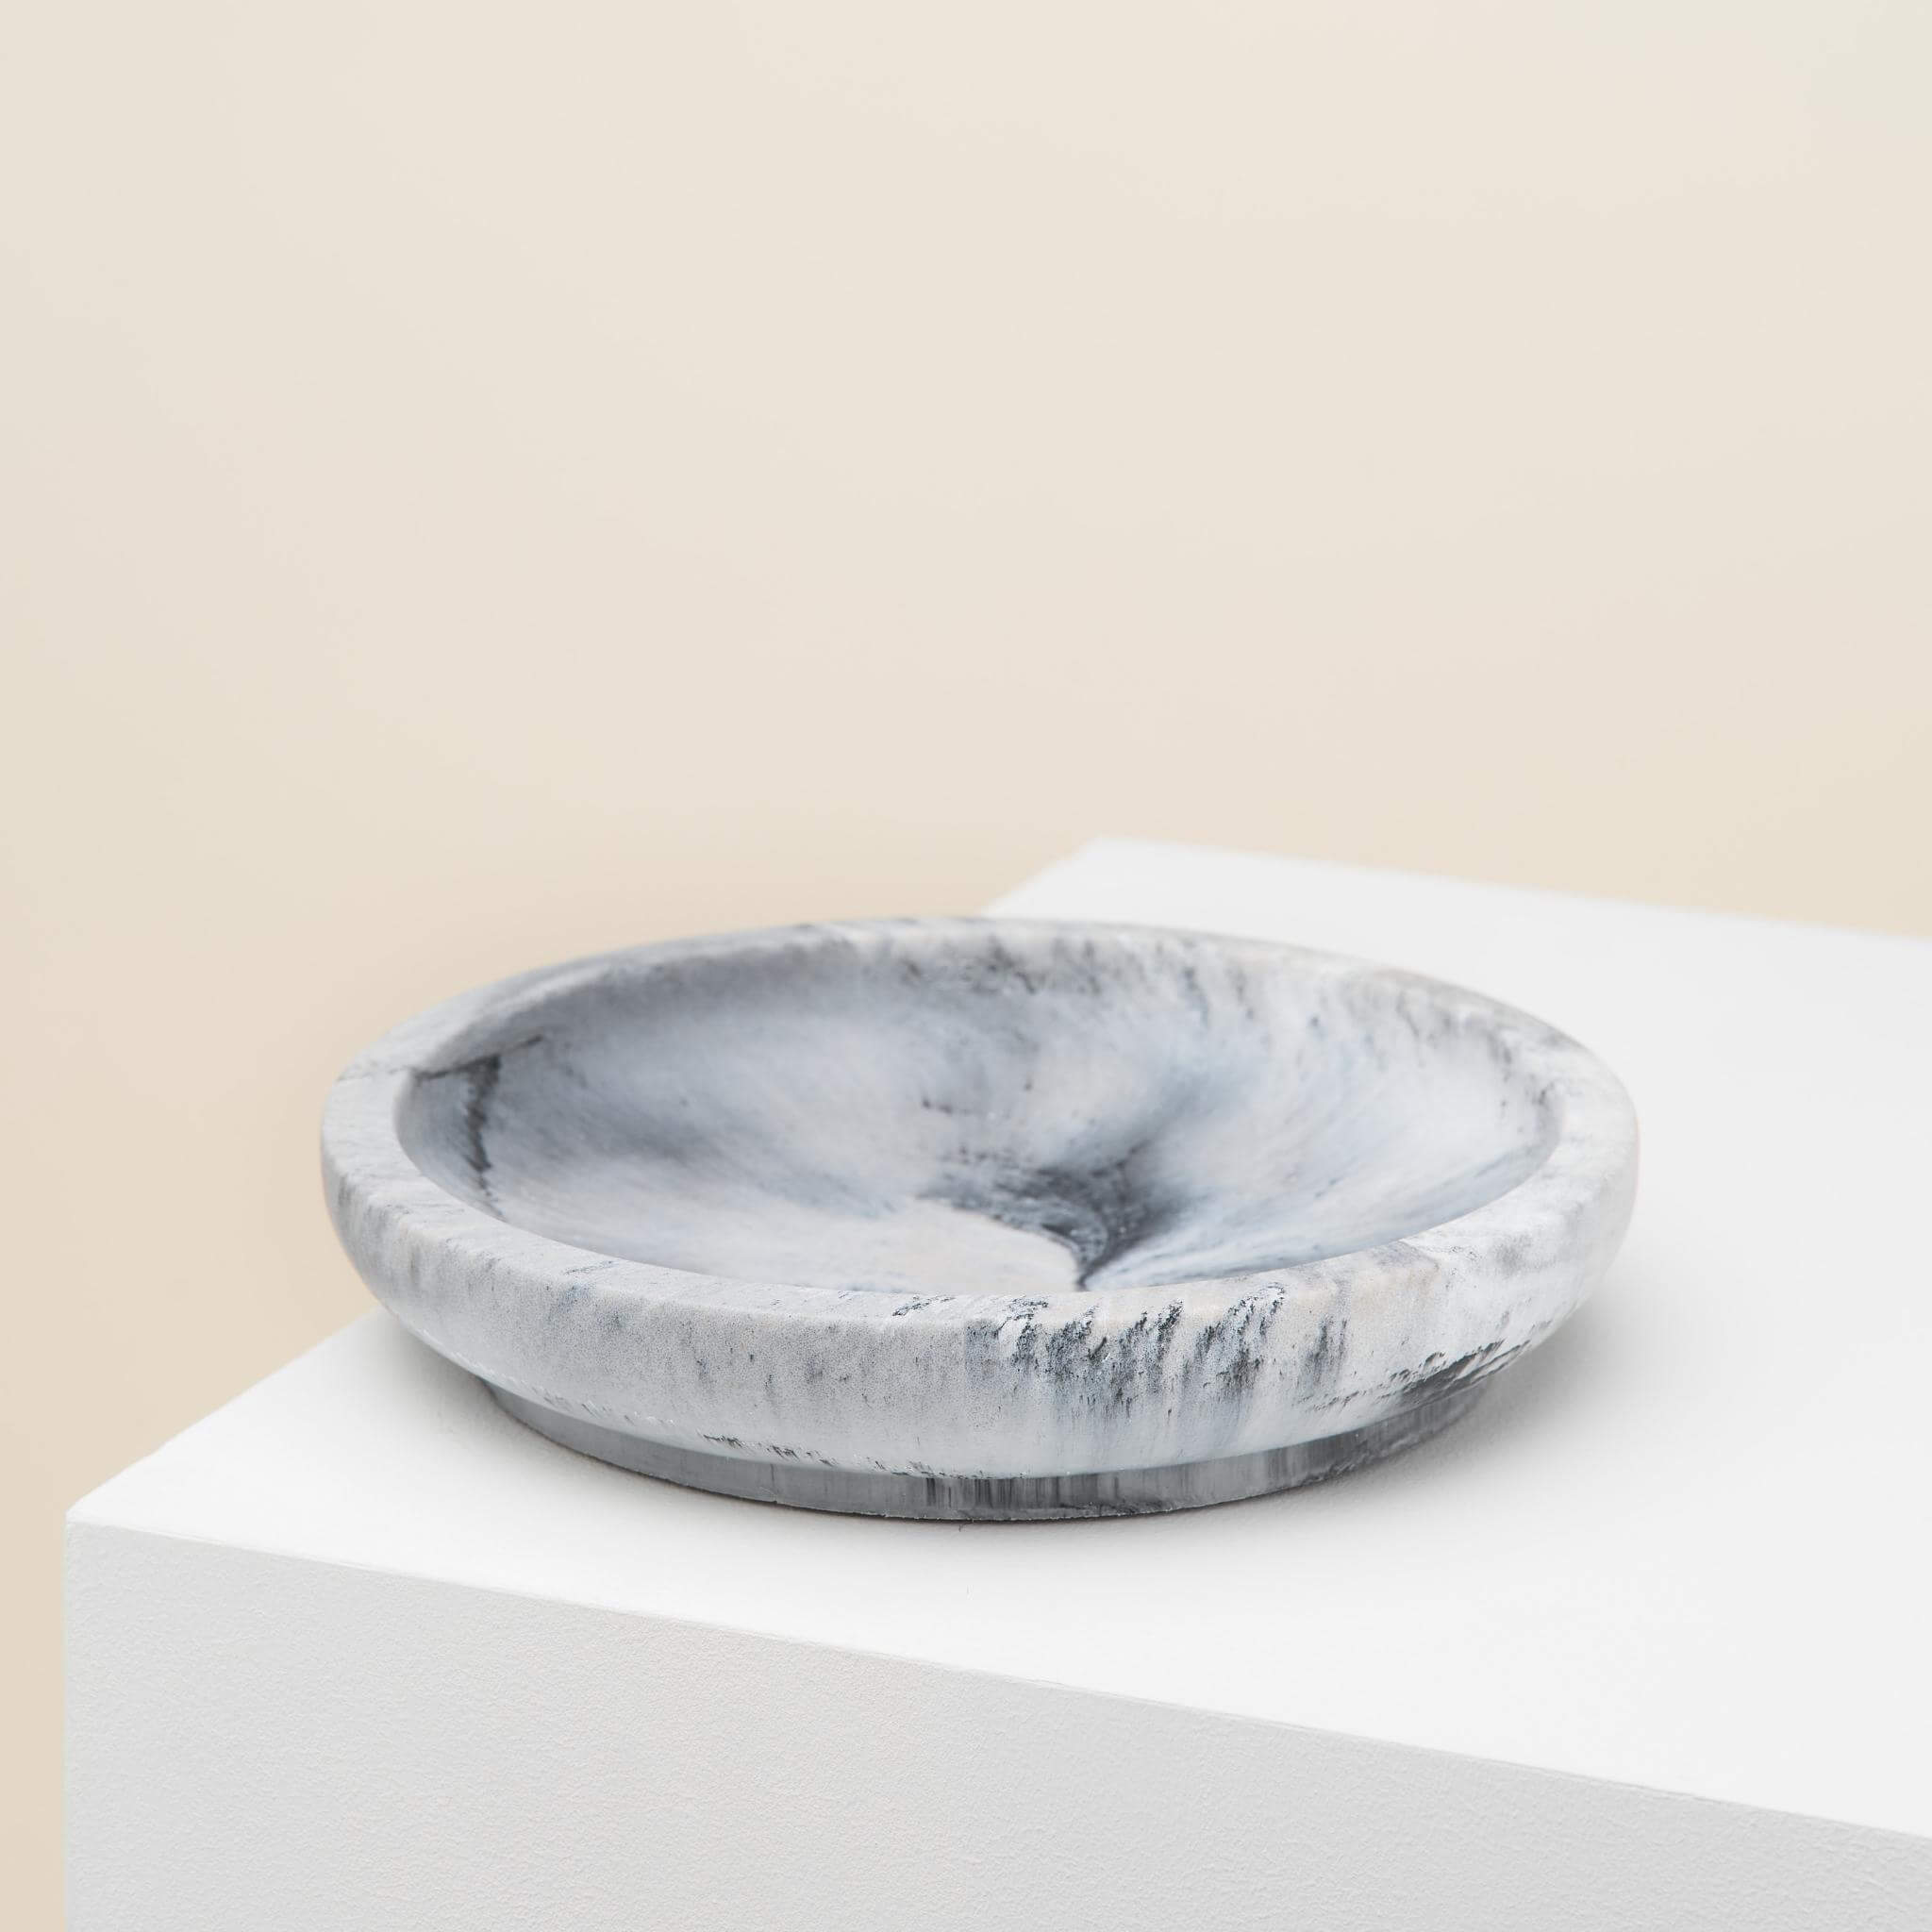 The classic feeder bowl for cats in Dolphin Gray marble color